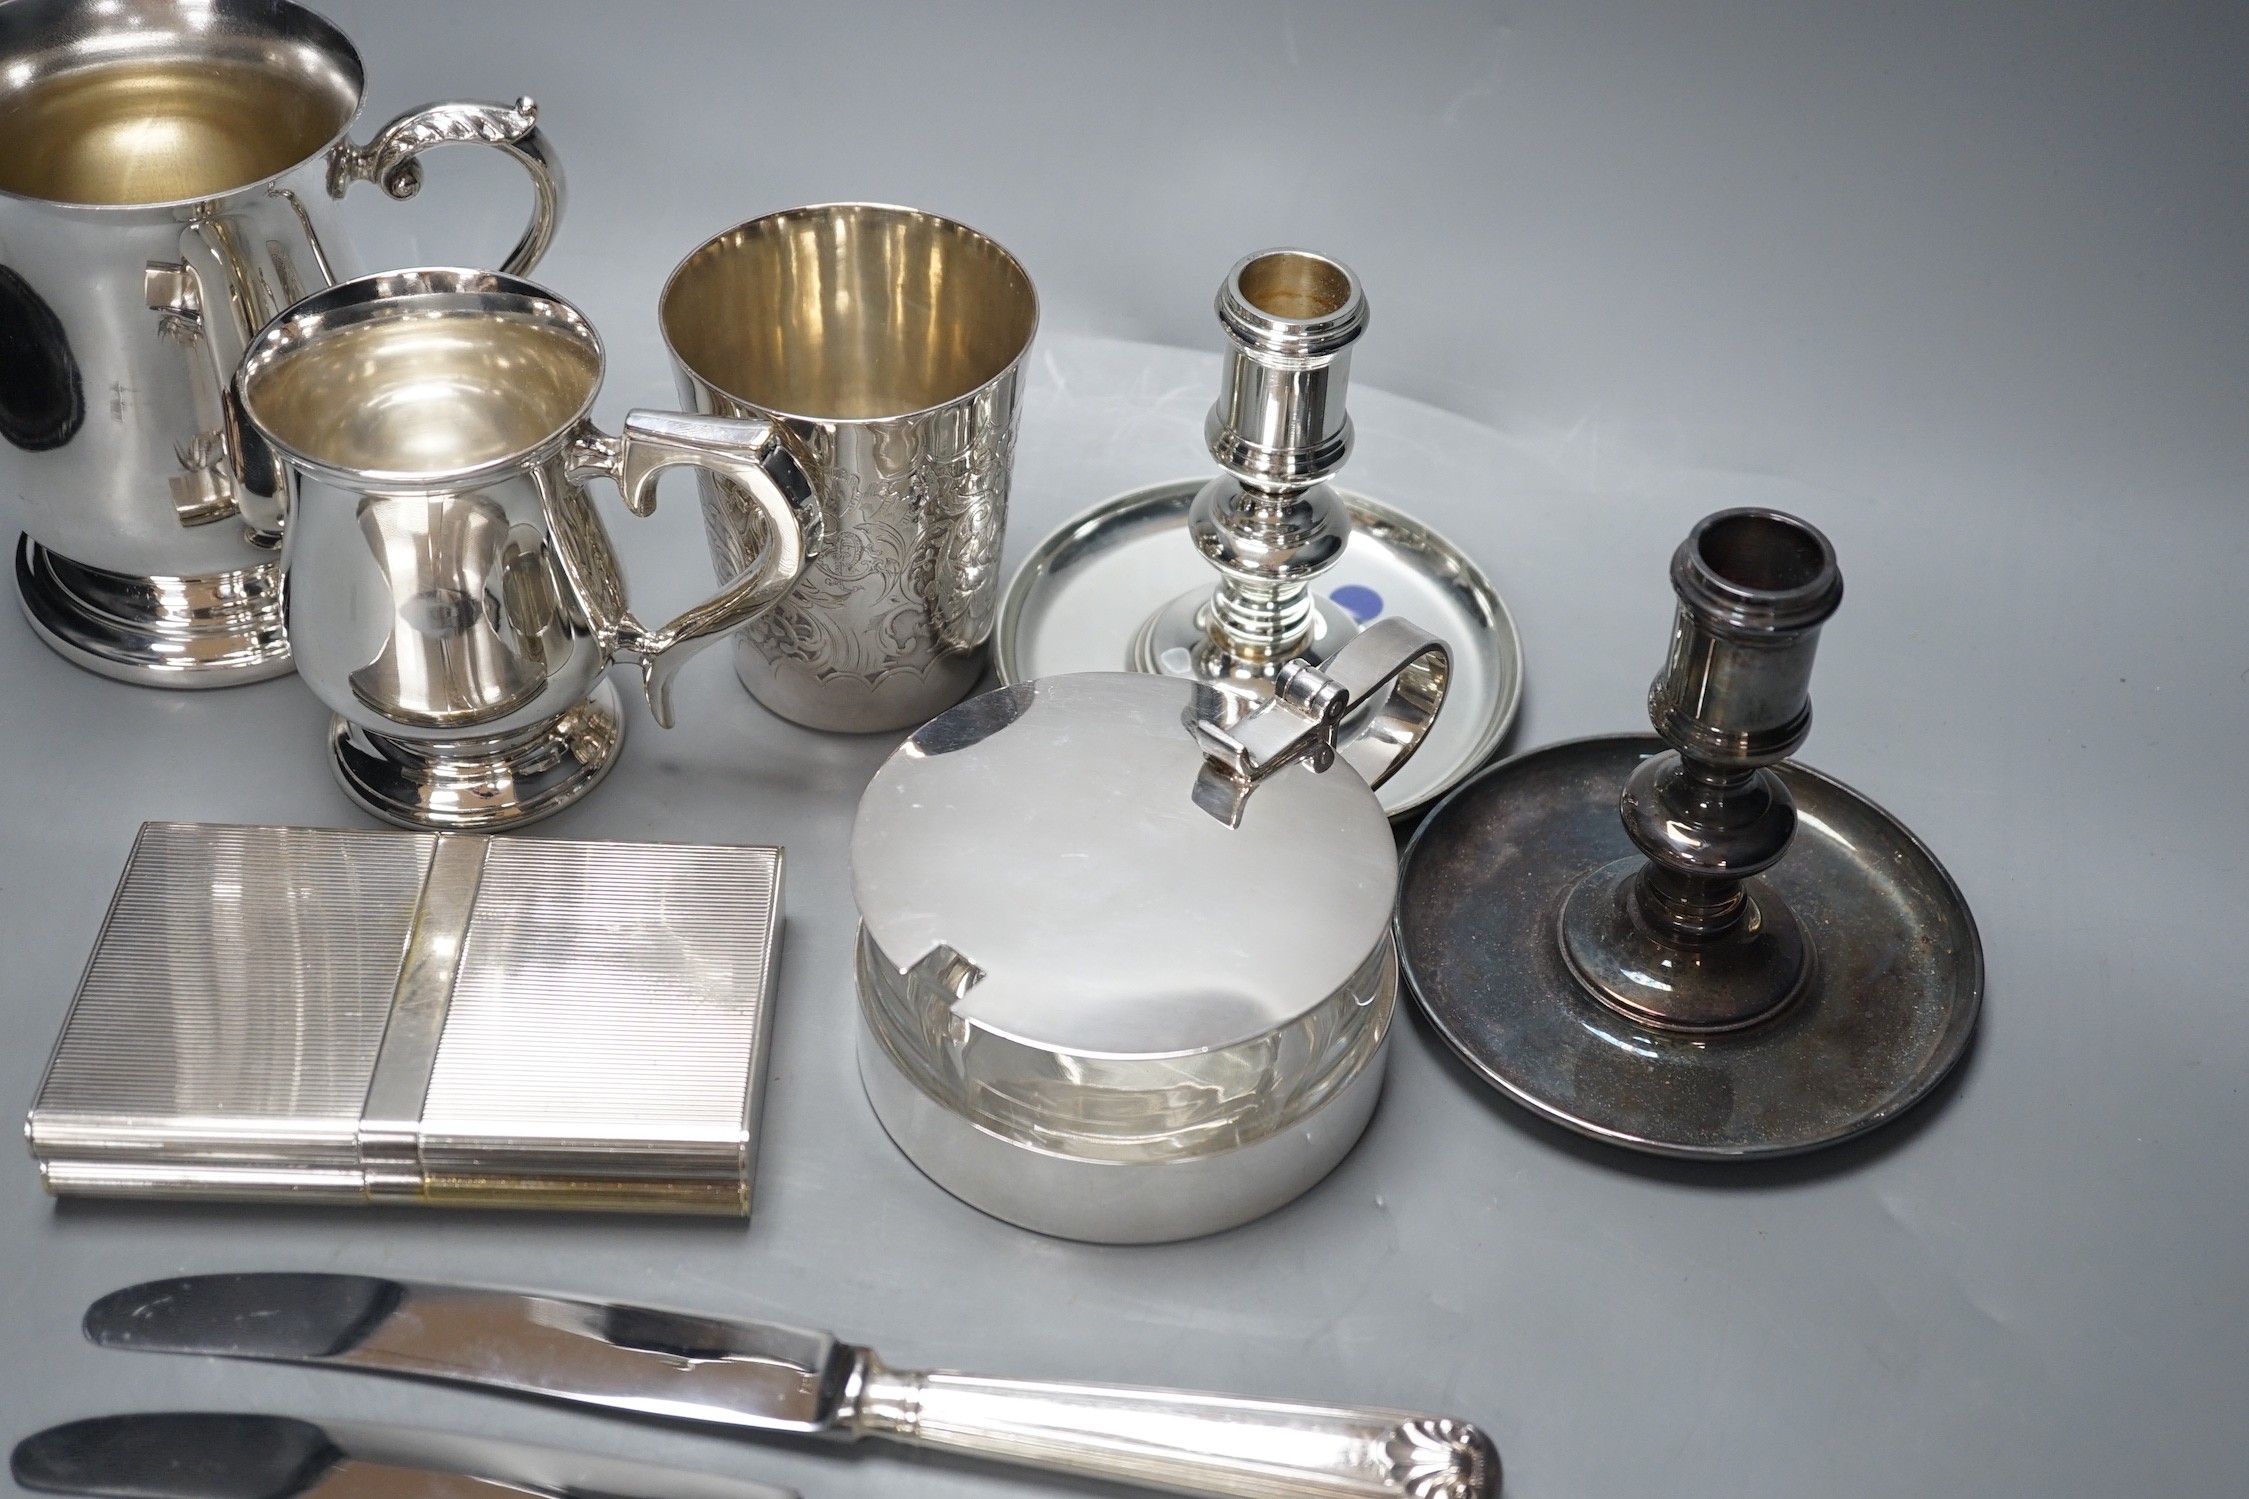 A Christofle plated preserve dish, assorted plated flatware, a beaker, etc.